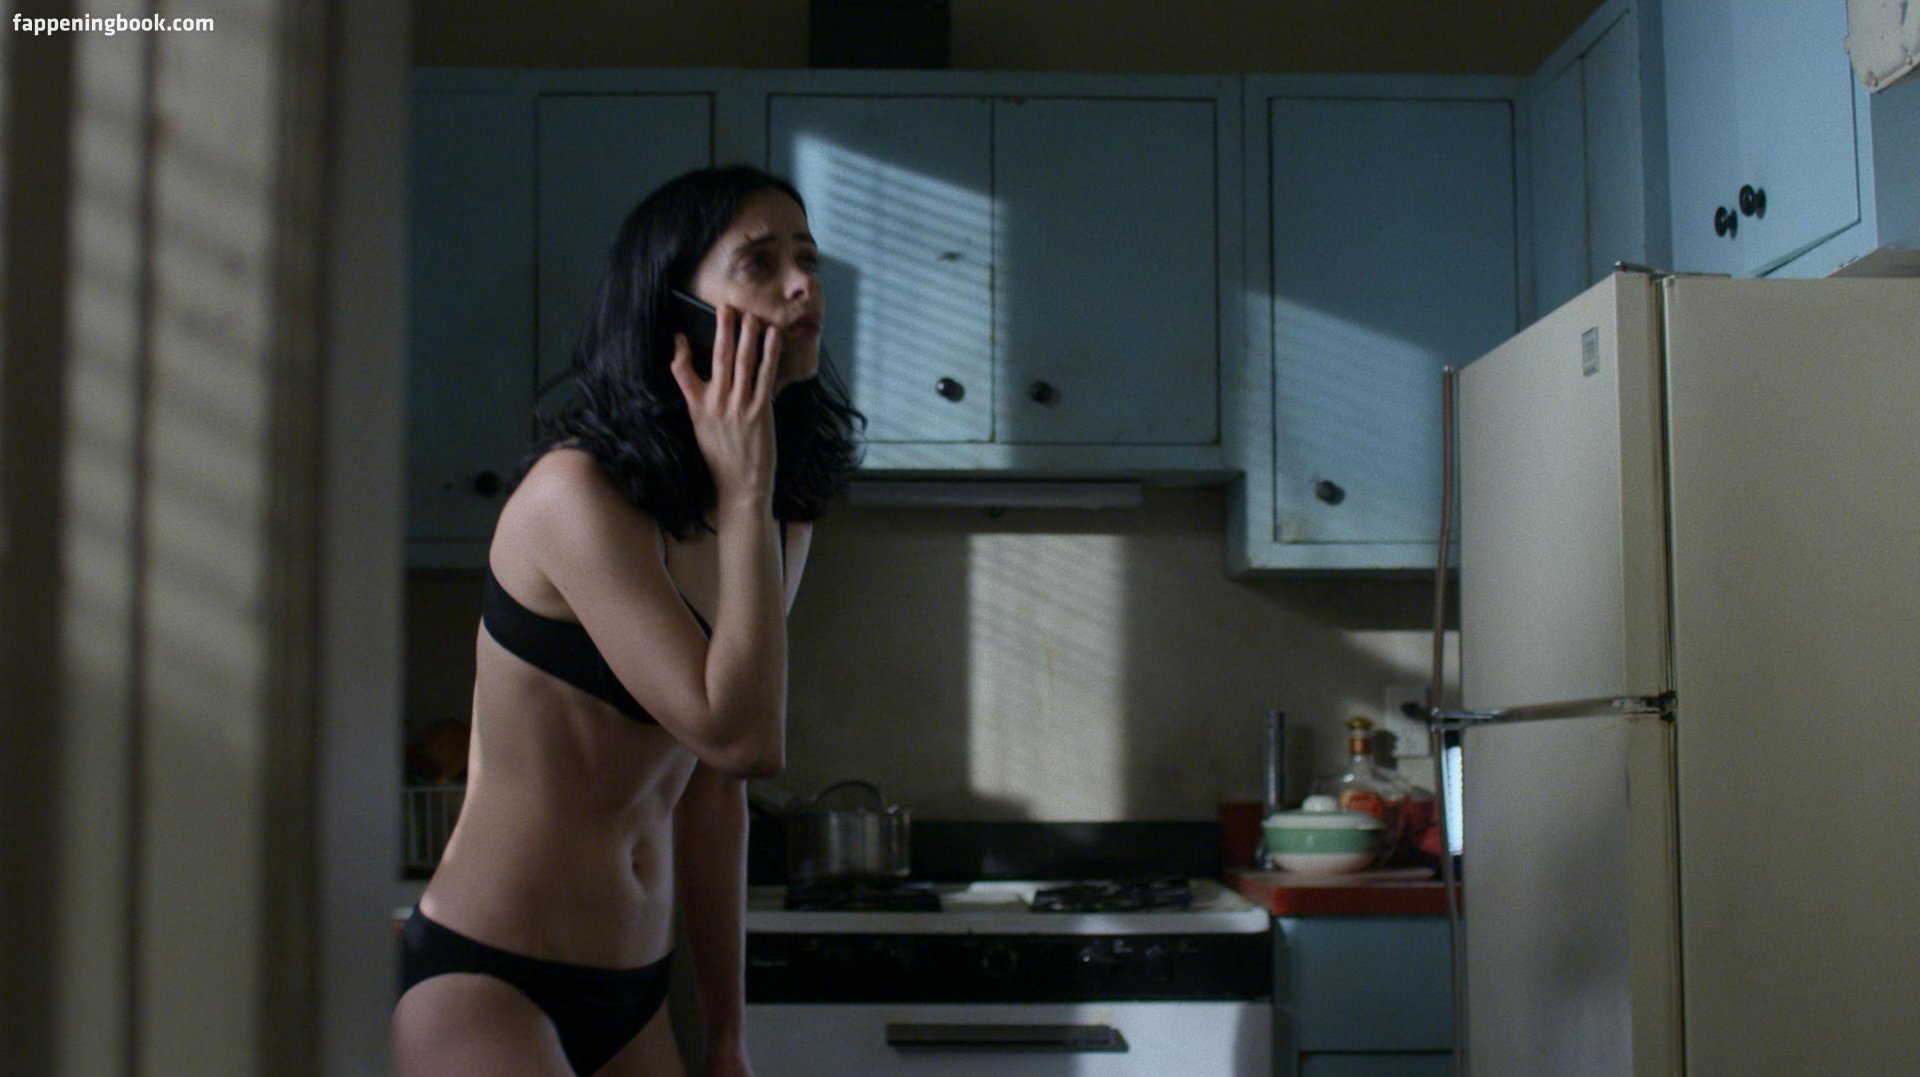 Krysten Ritter Nude, The Fappening - Photo #319373 - FappeningBook 